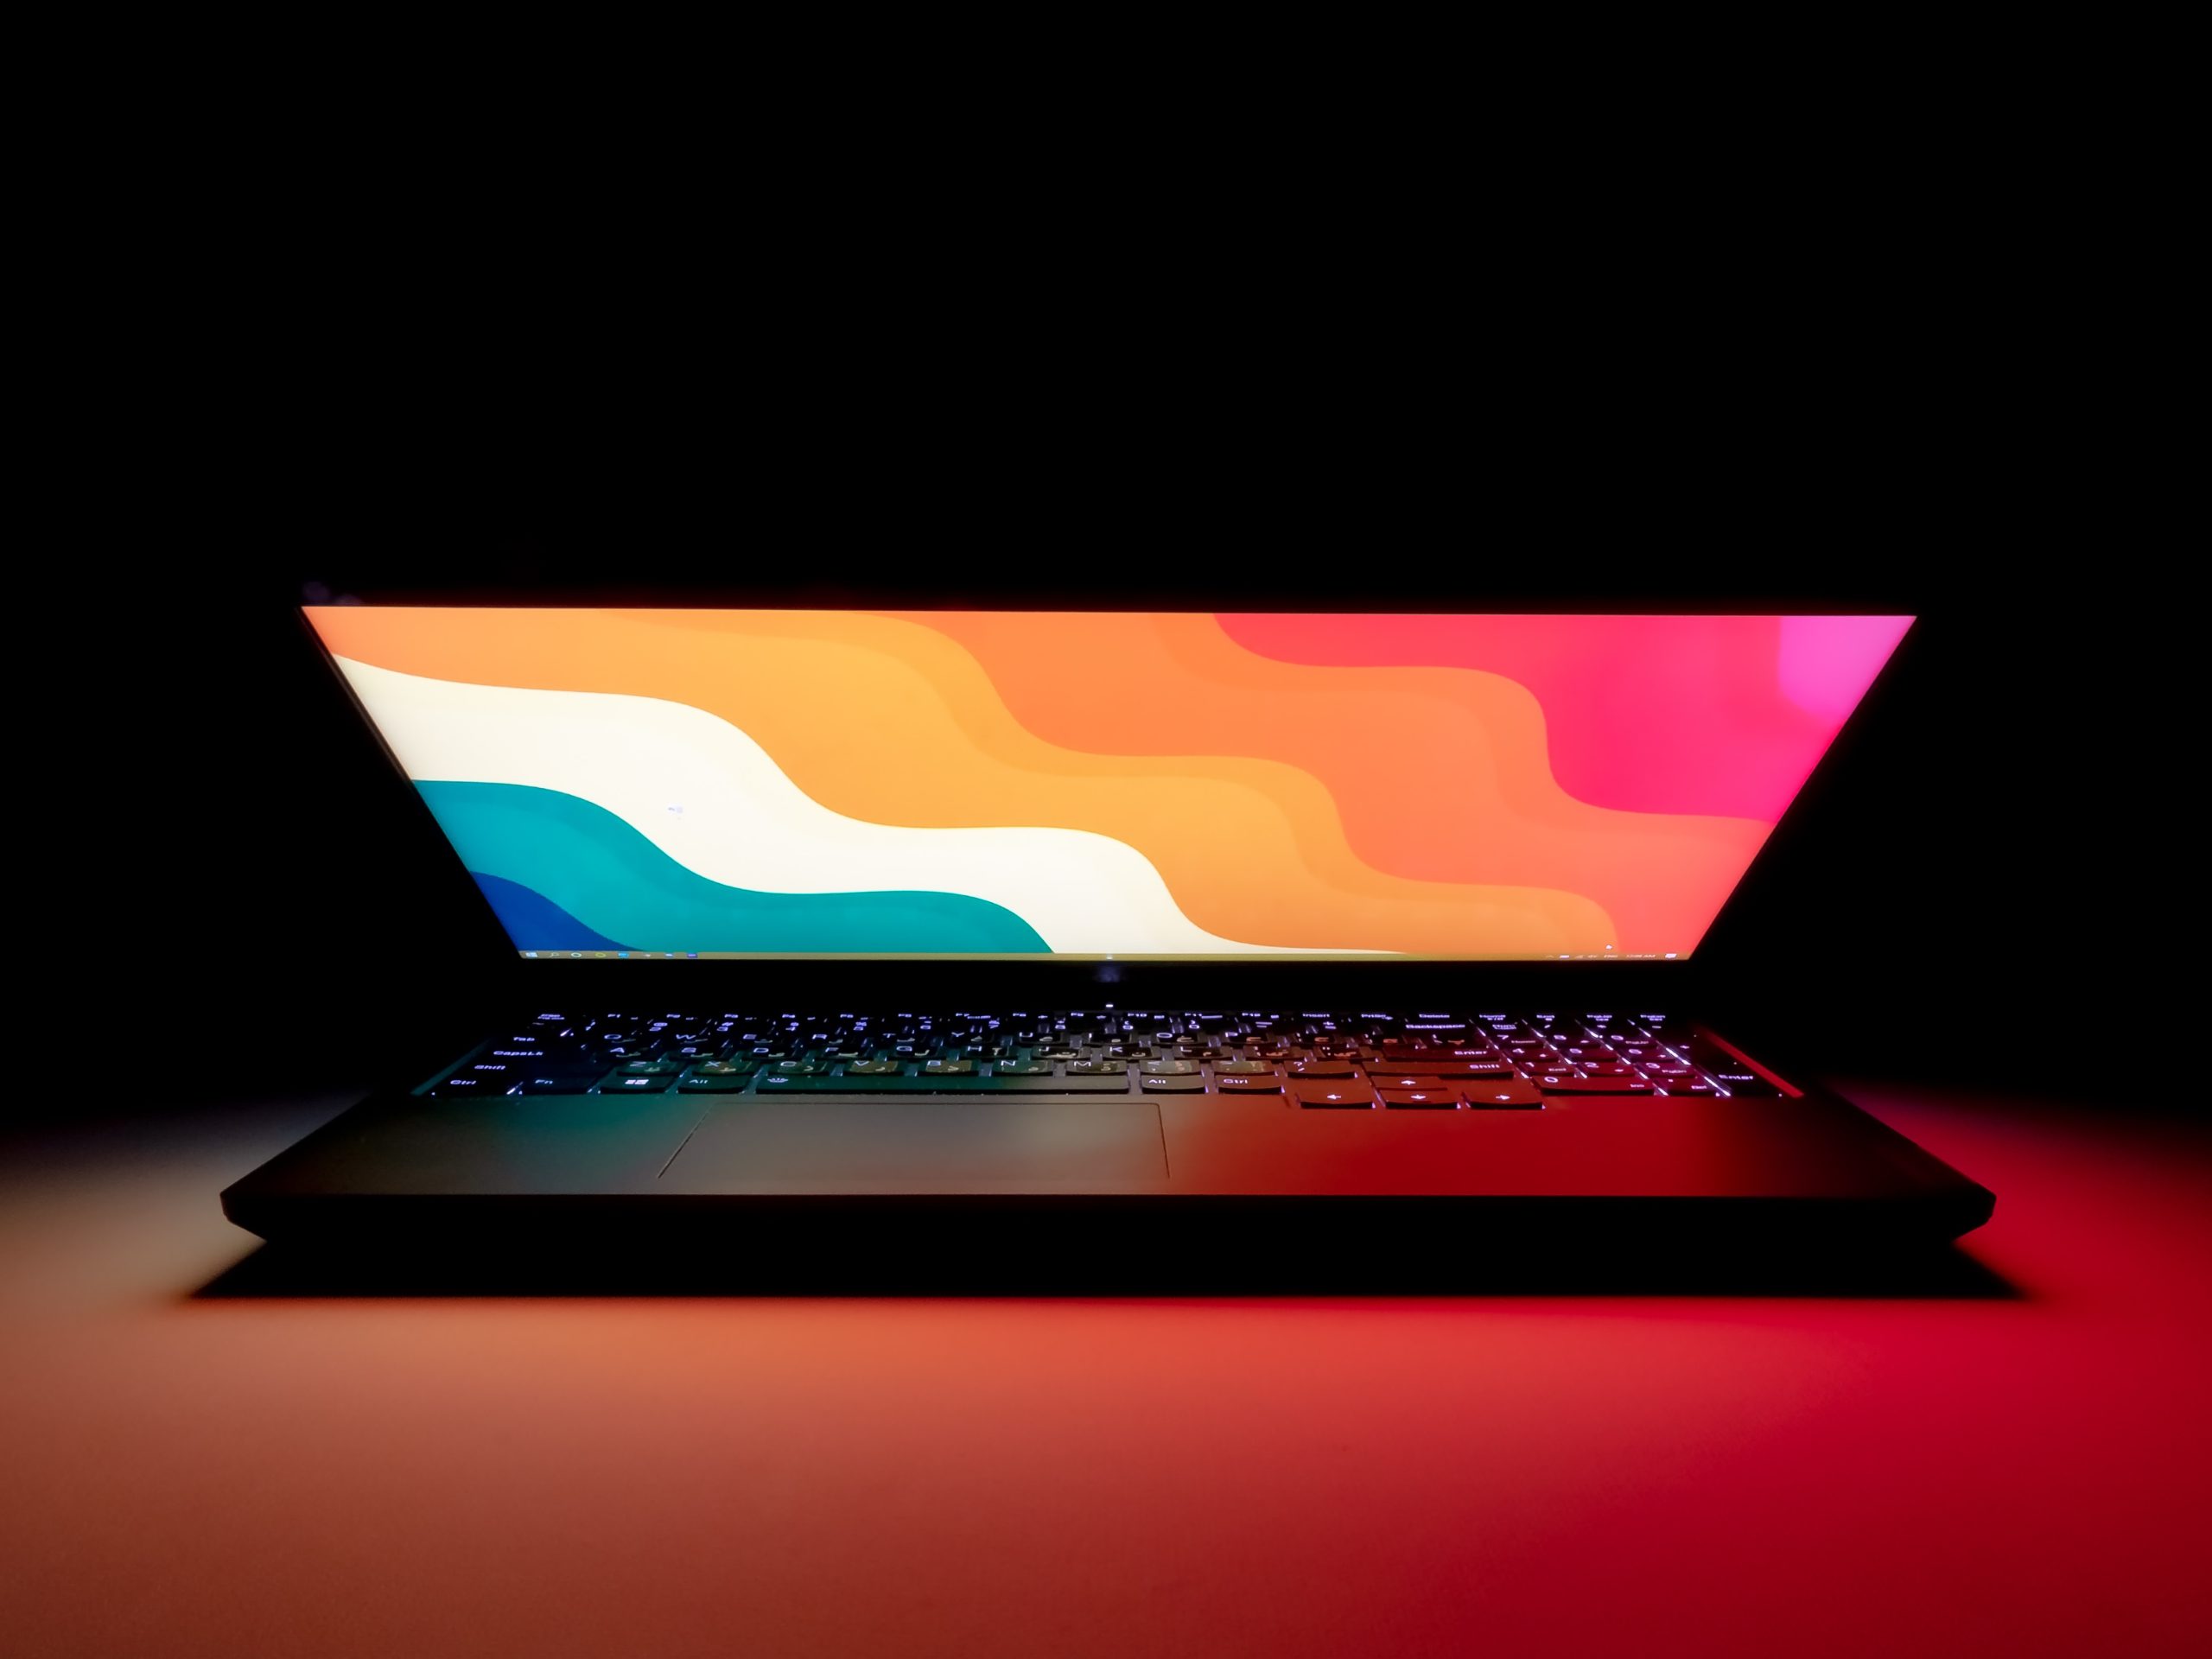 A laptop with a colorful screen on a dark background.